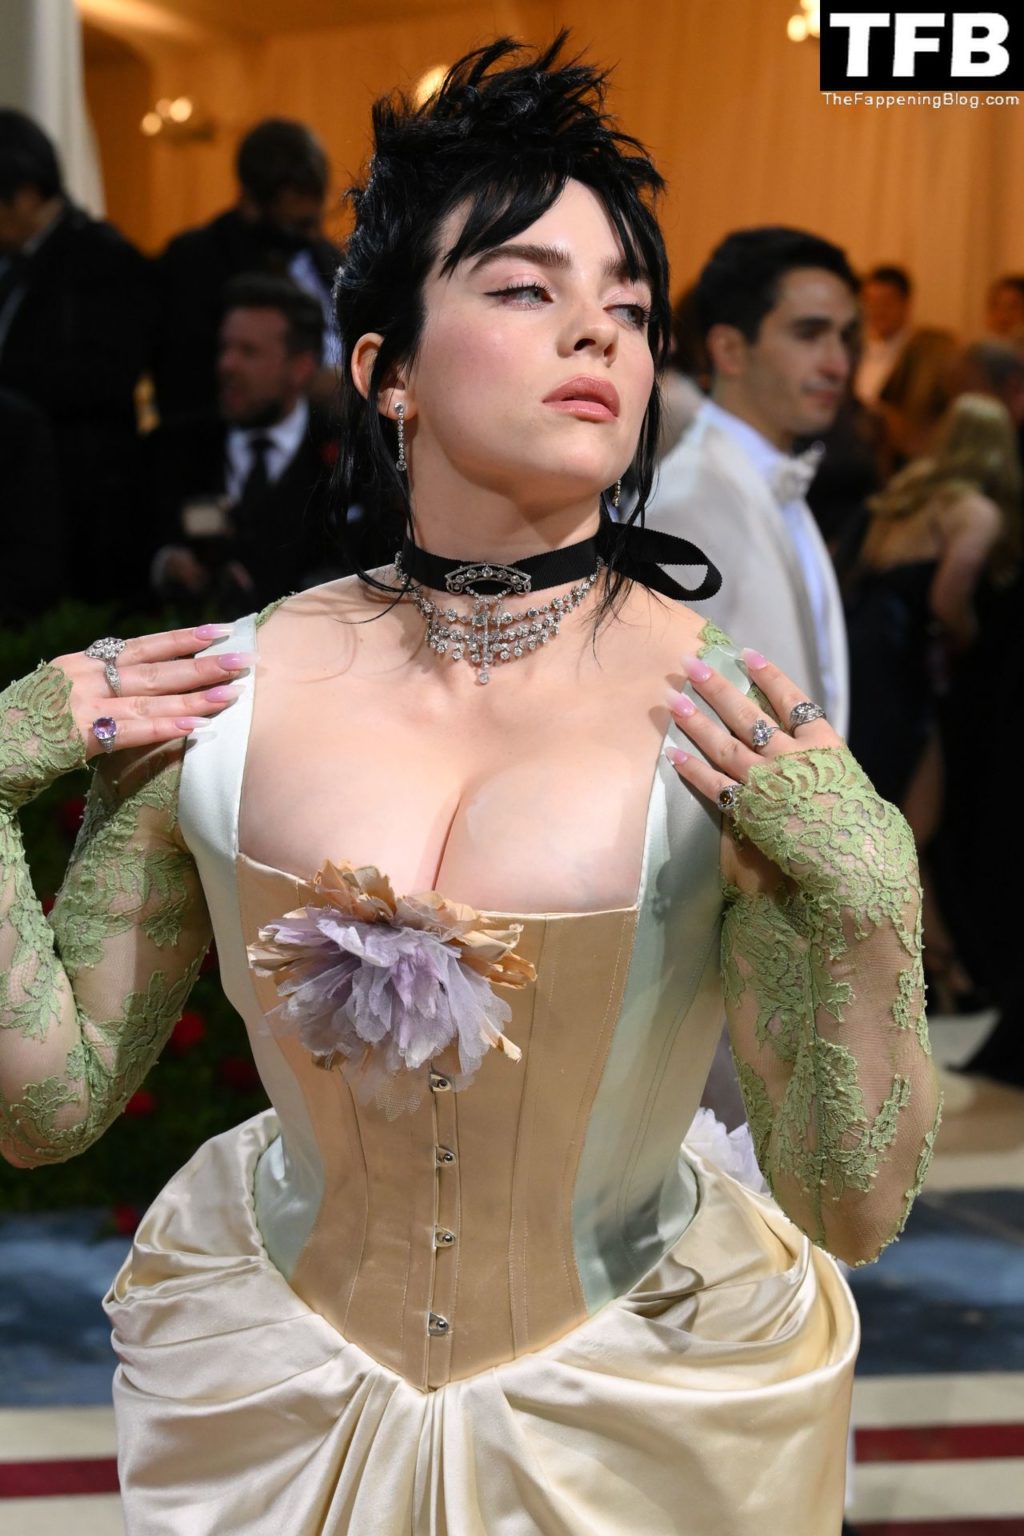 Billie Eilish Sexy The Fappening Blog 128 1024x1536 - Billie Eilish Showcases Nice Cleavage at The 2022 Met Gala in NYC (155 Photos)